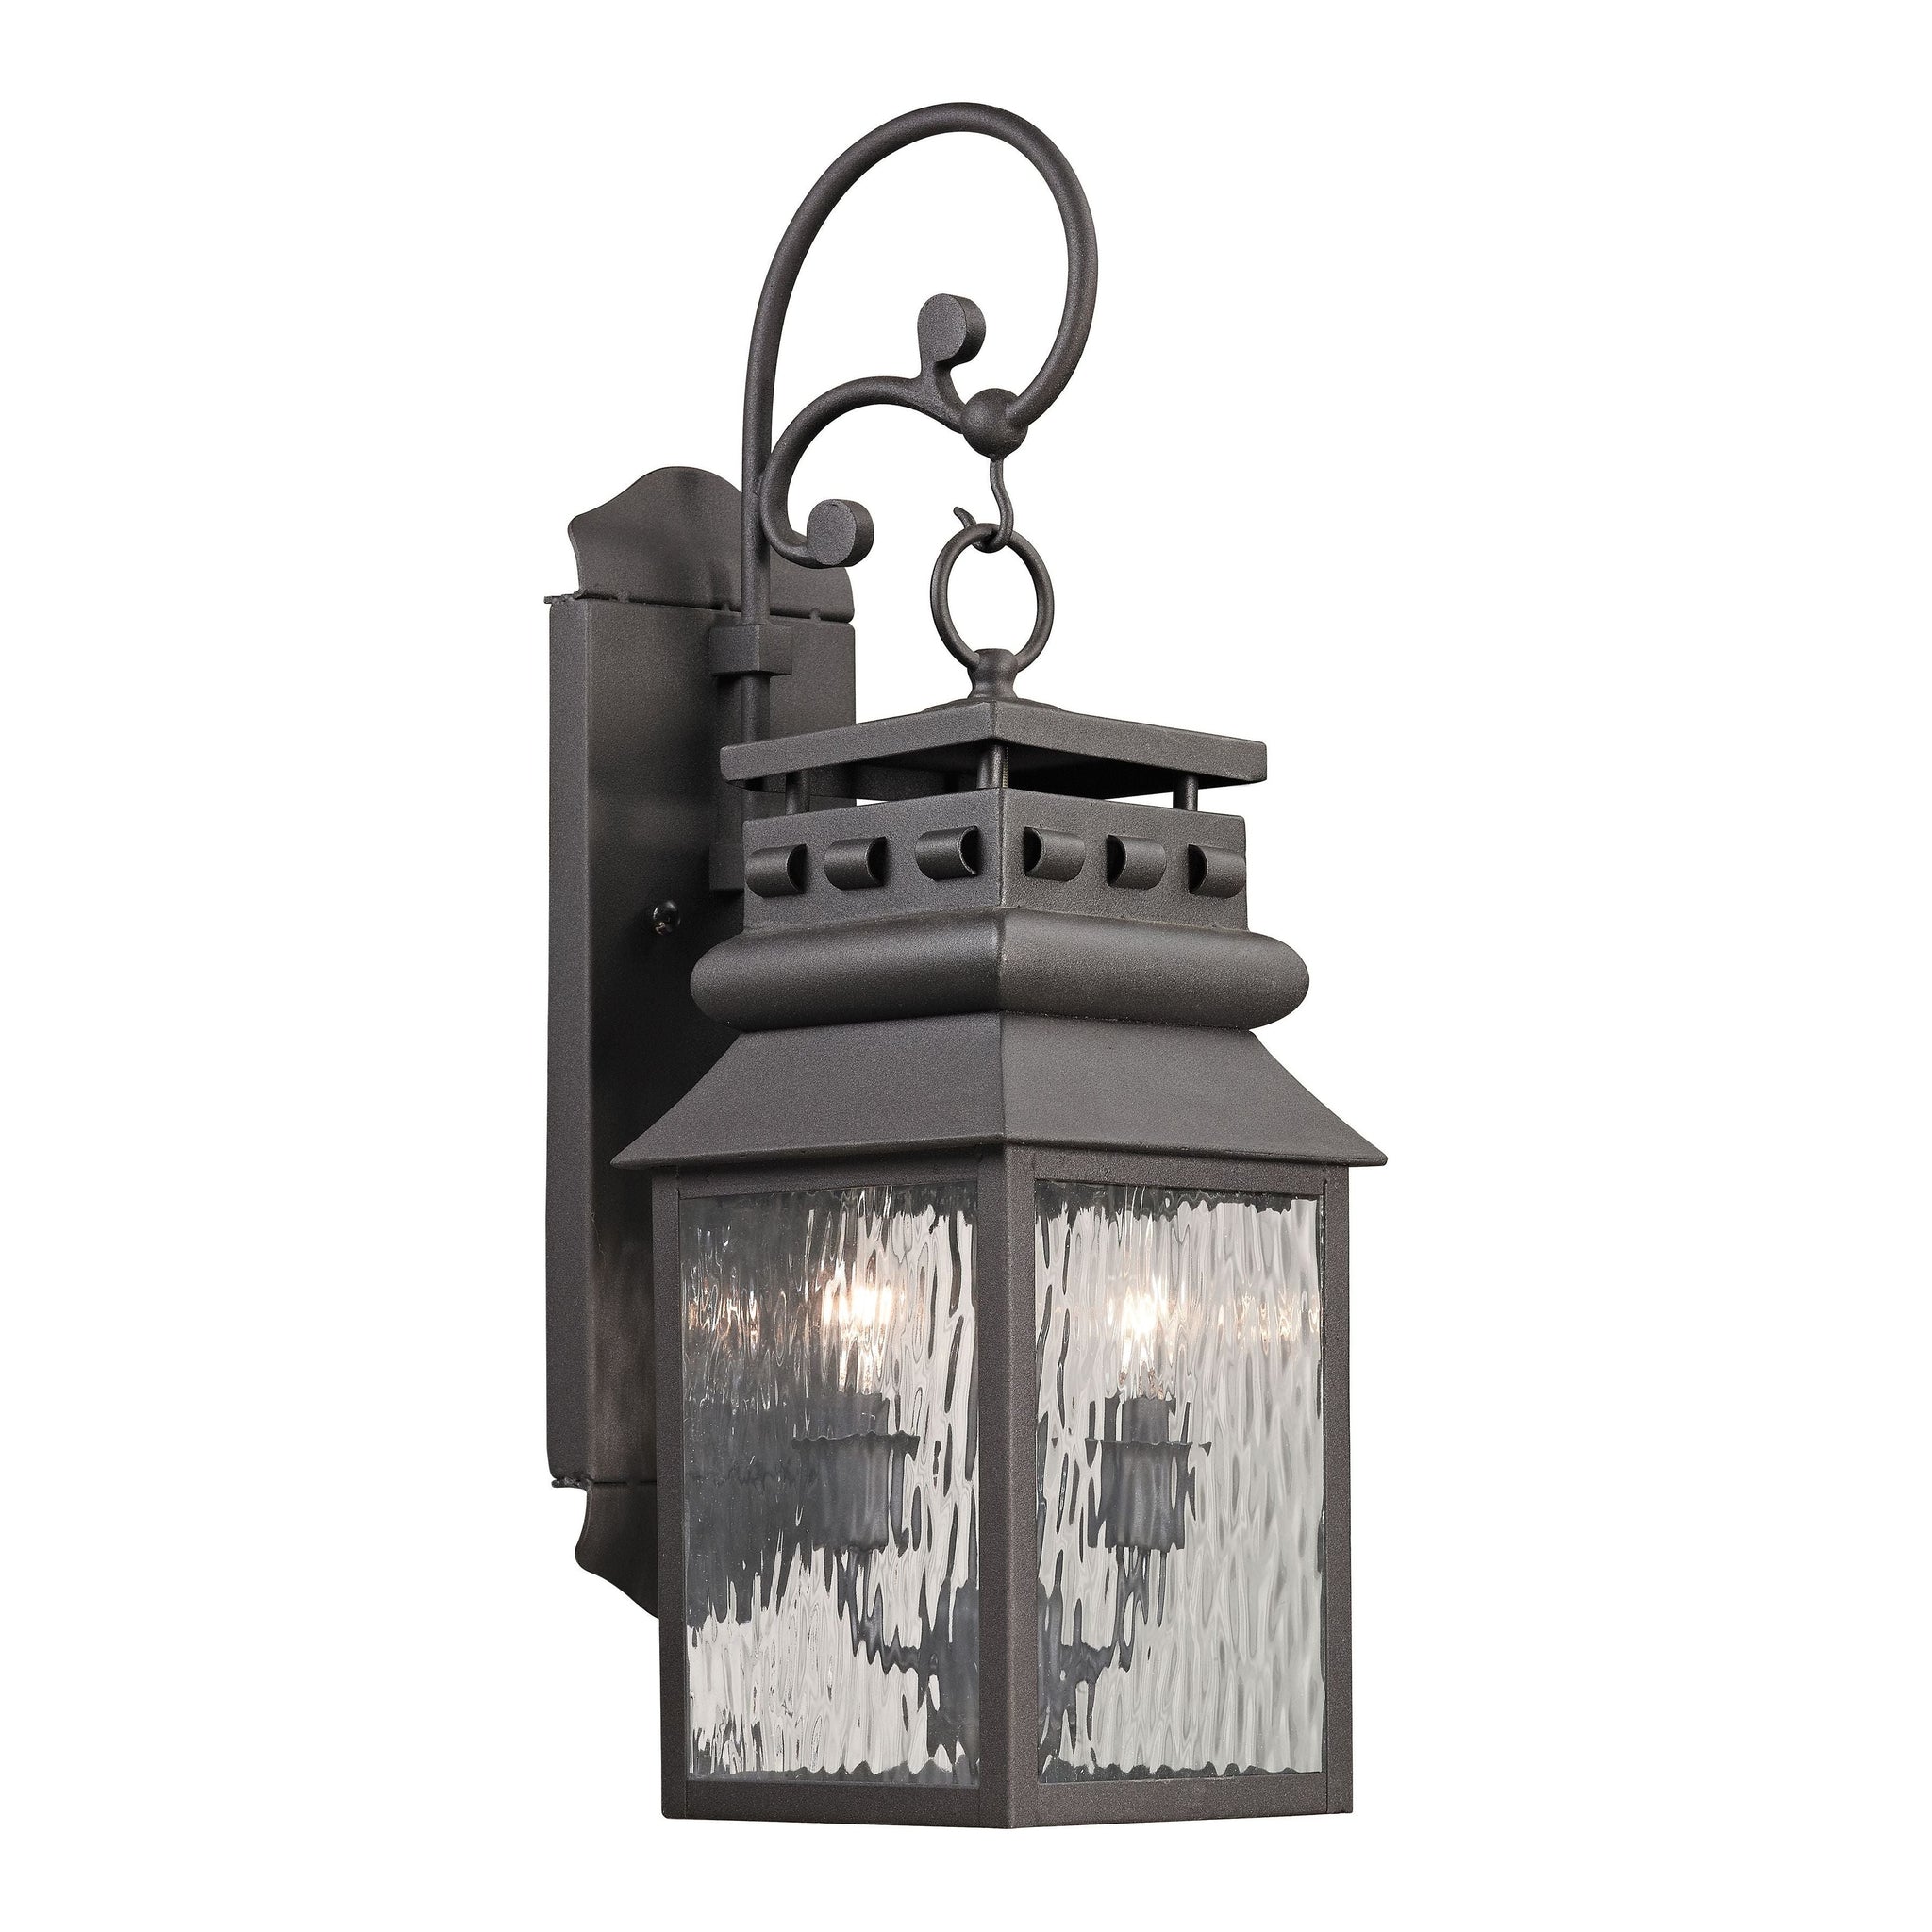 Forged Lancaster 22" High 2-Light Outdoor Sconce